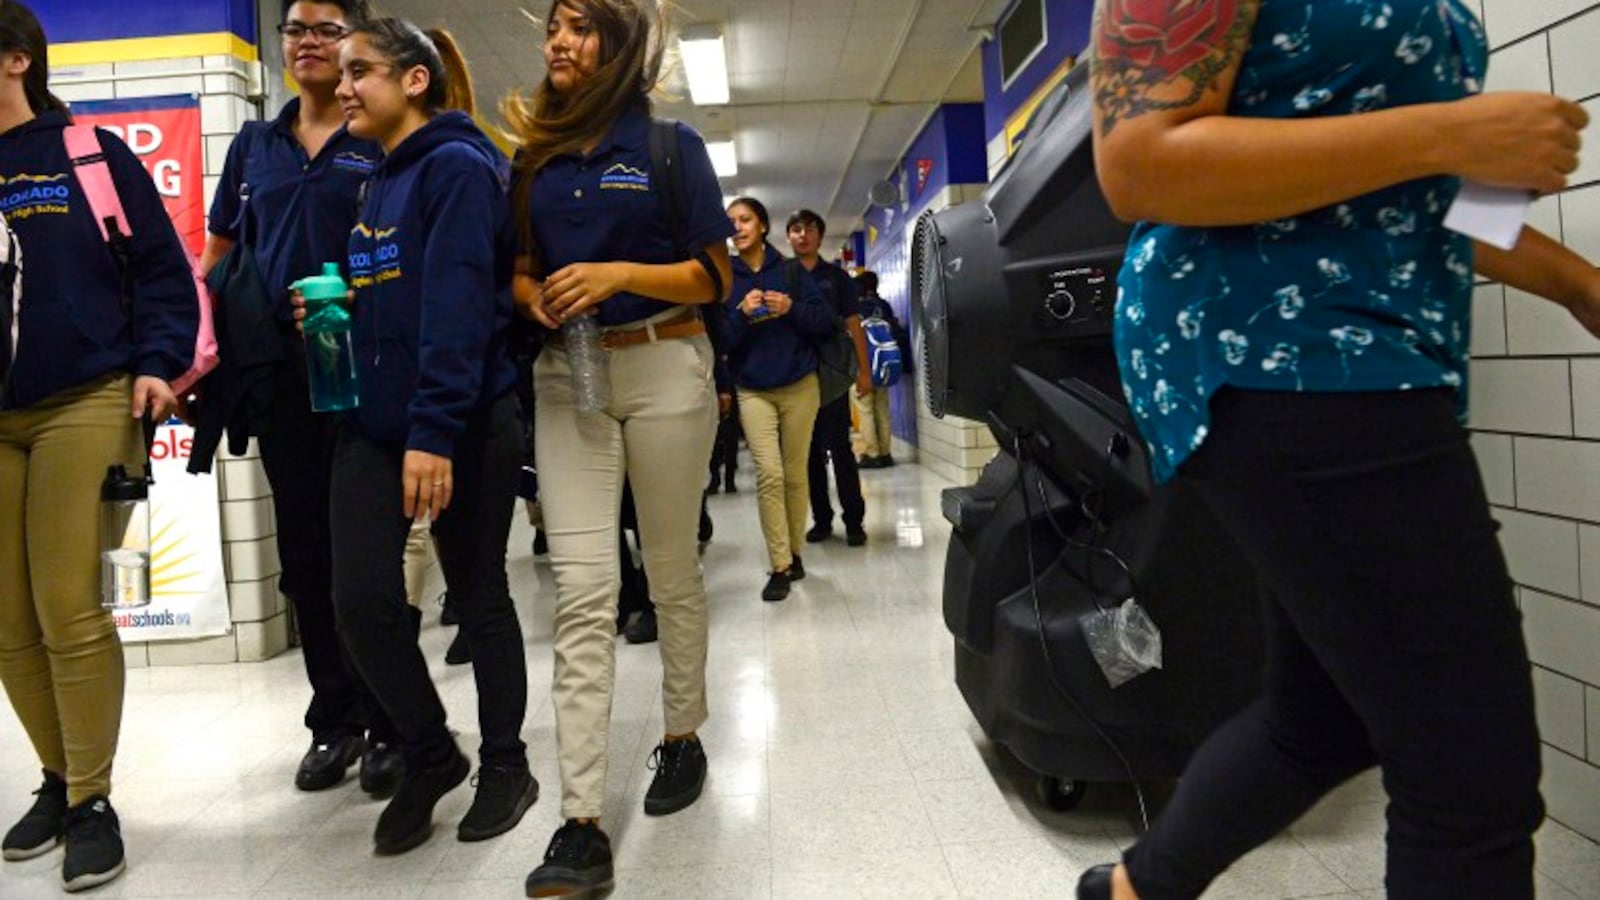 Students walk by large portable cooling systems set up in the hallways of KIPP Denver Collegiate High School in 2018.